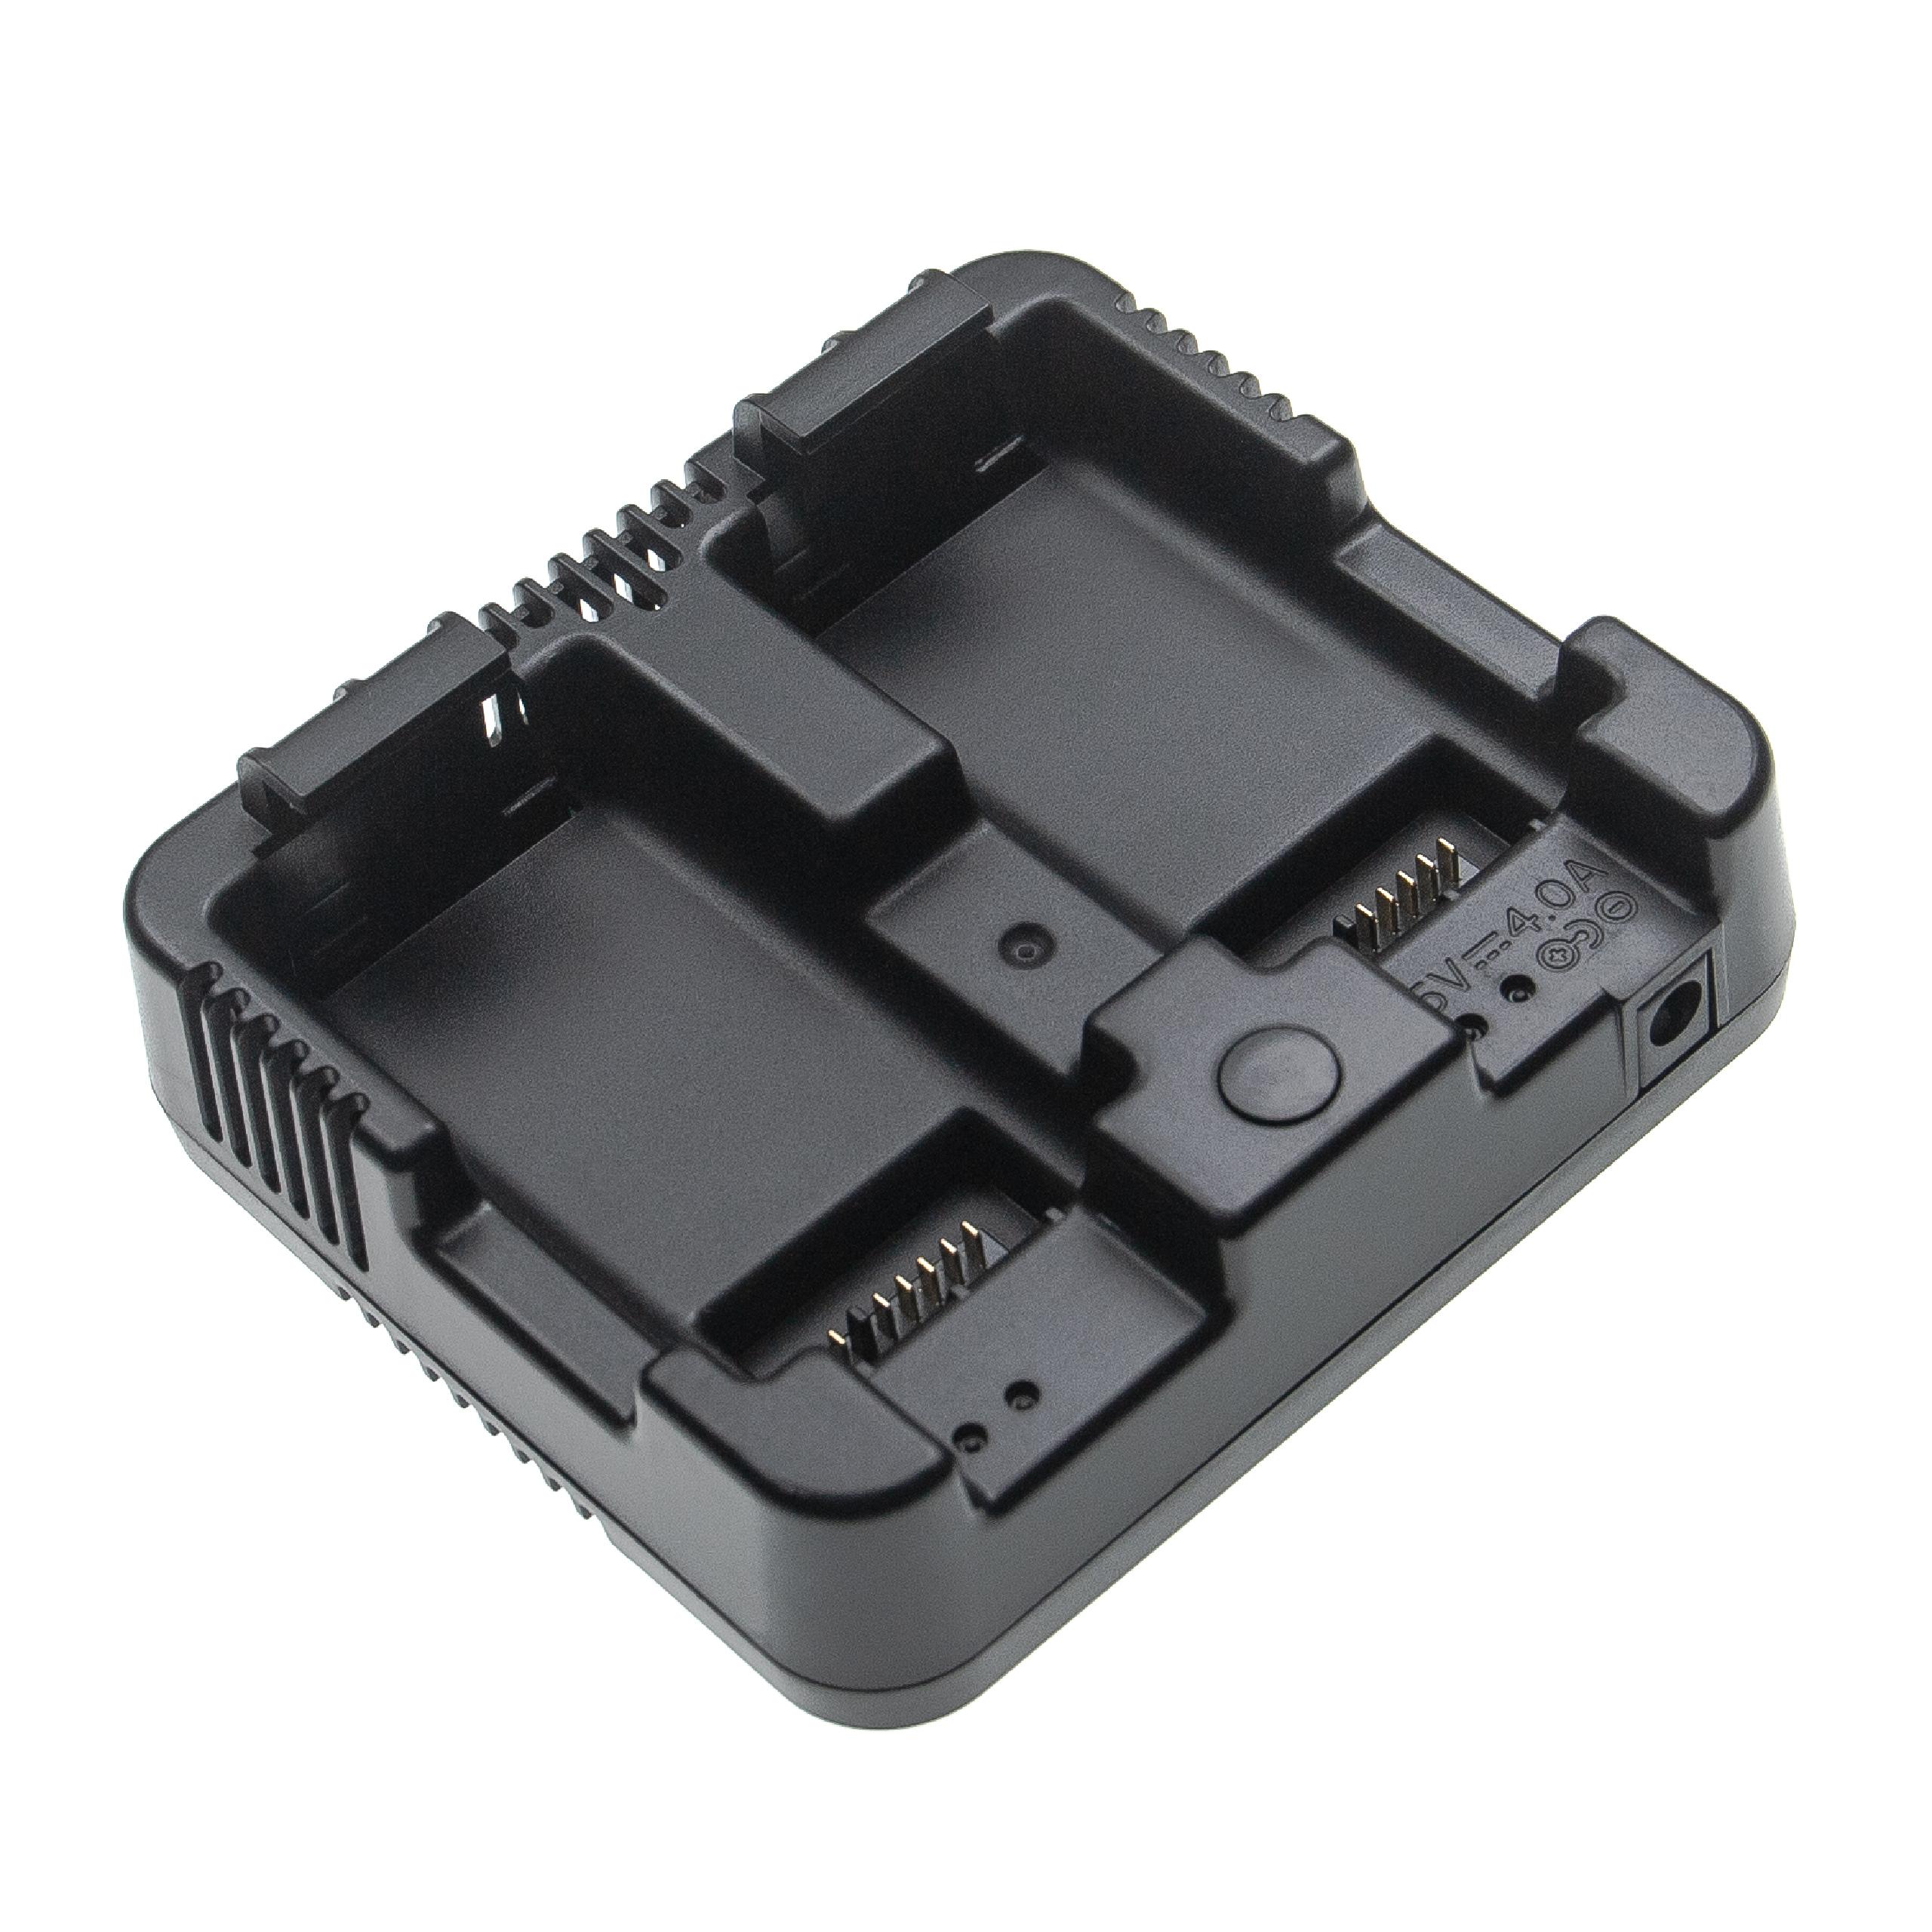 Charger as Replacement for Nikon 108571-00, 53708-00 for Measuring Tool / Battery - Charge Dock, 5 V / 4 A